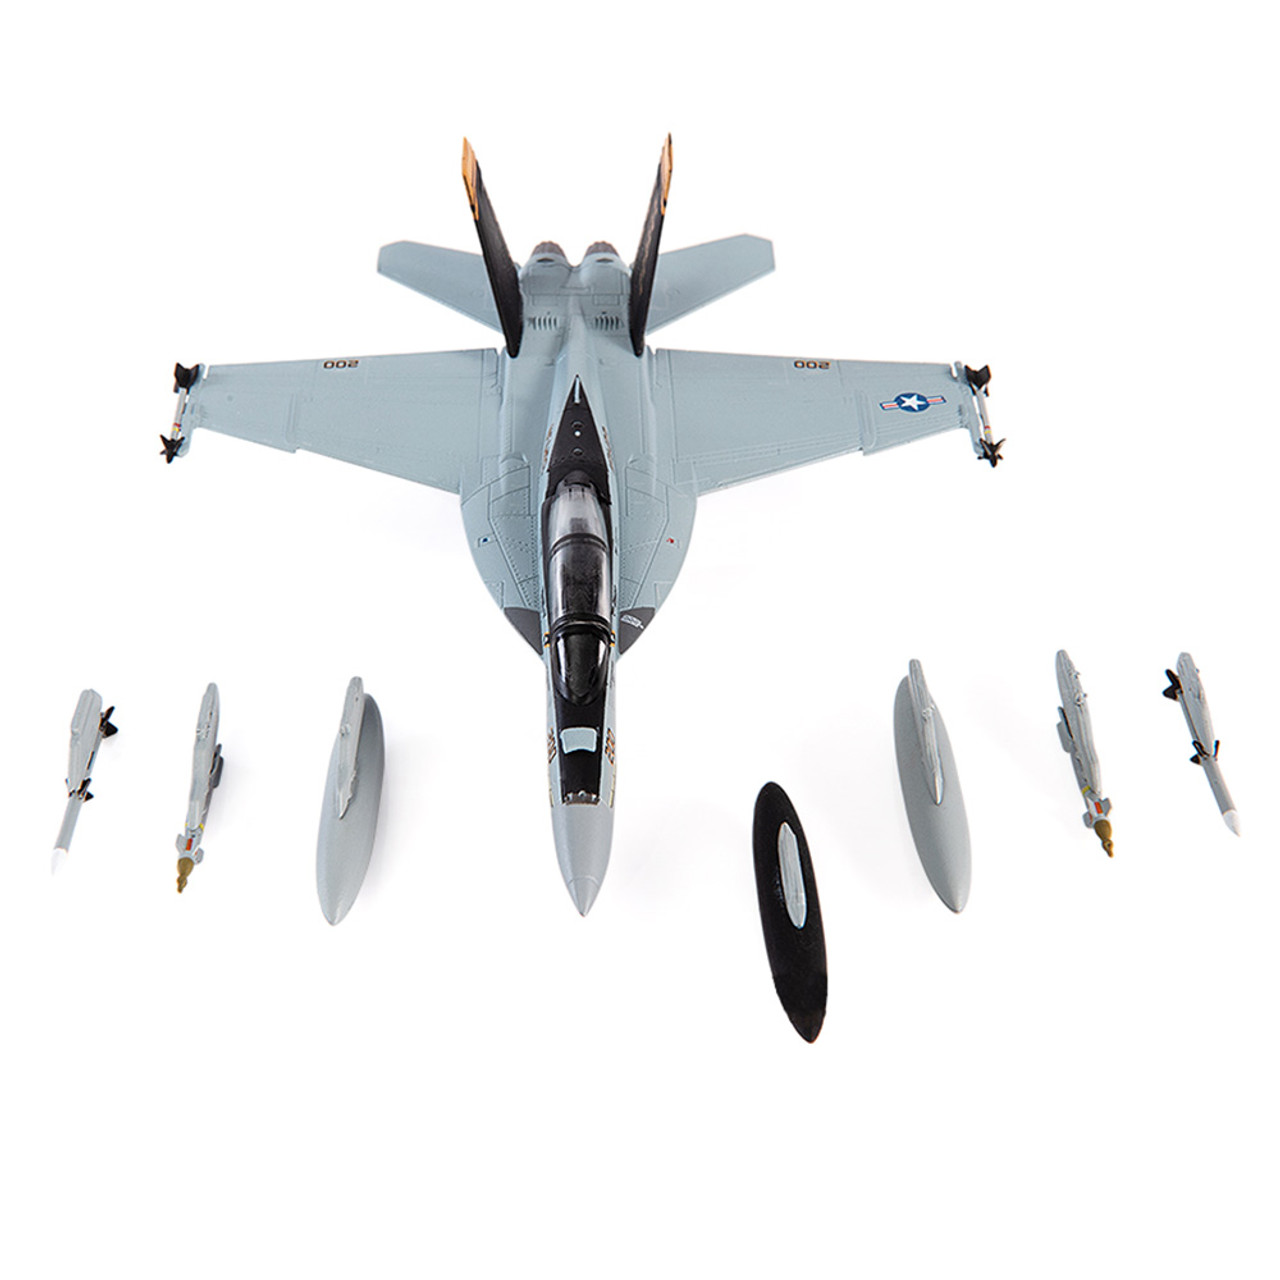 1/144 JC Wings 2018 F/A-18F Super Hornet U.S. NAVY VFA-103 Jolly Rogers, 75th Anniversary Edition Model